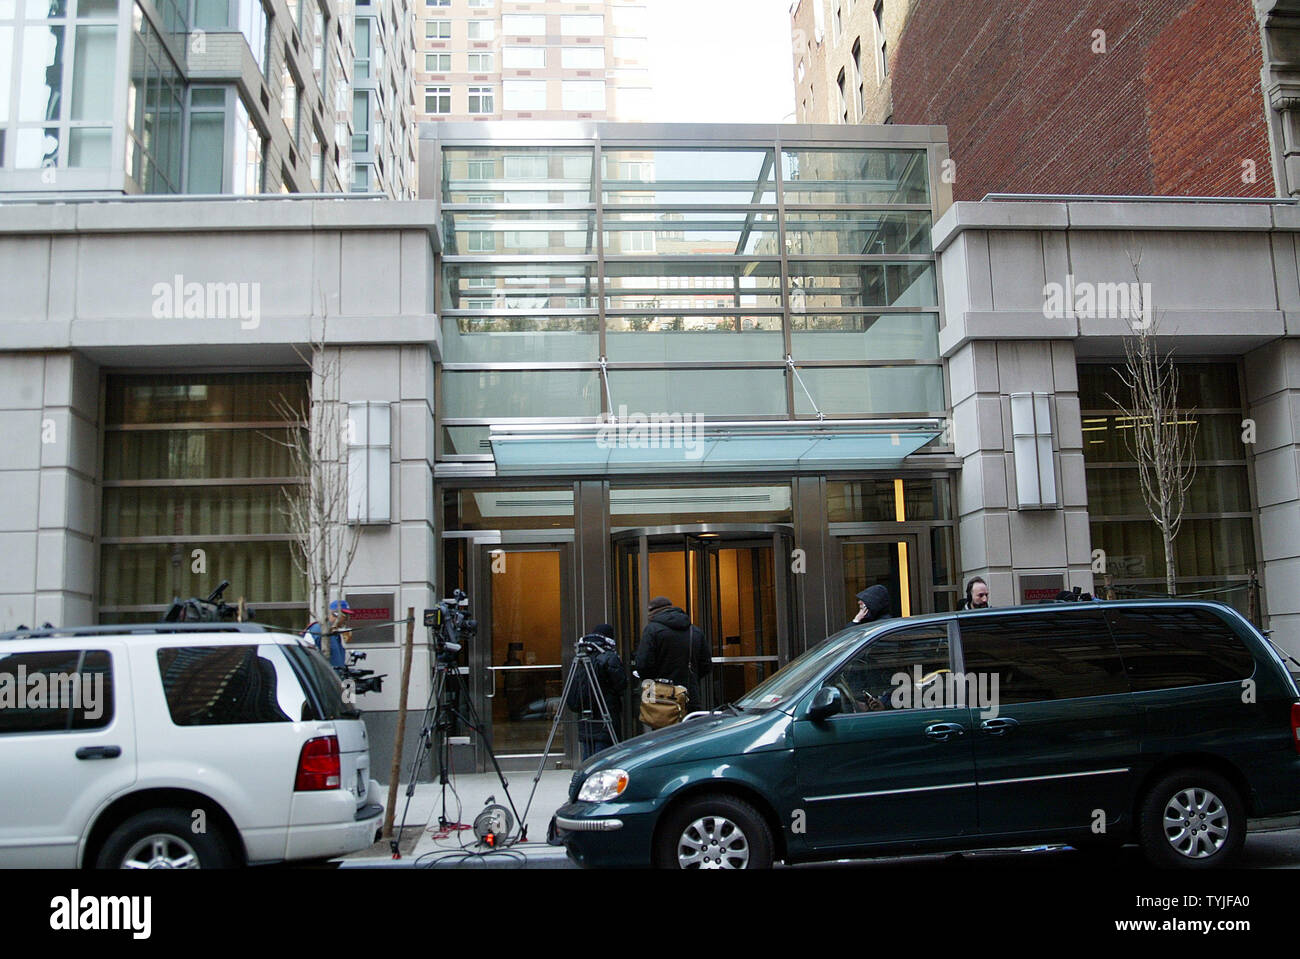 The Exterior of the Chelsea Landmark building on W. 25th Street is pictured in New York on March 13, 2008. The building is where Ashley Alexandra Dupre, aka 'Kristen' lives, the last call girl to spend the night with New York Governor Eliot Spitzer before he was forced to resign amid an FBI probe into his involvement in a prostitution ring.   (UPI Photo/Laura Cavanaugh) Stock Photo